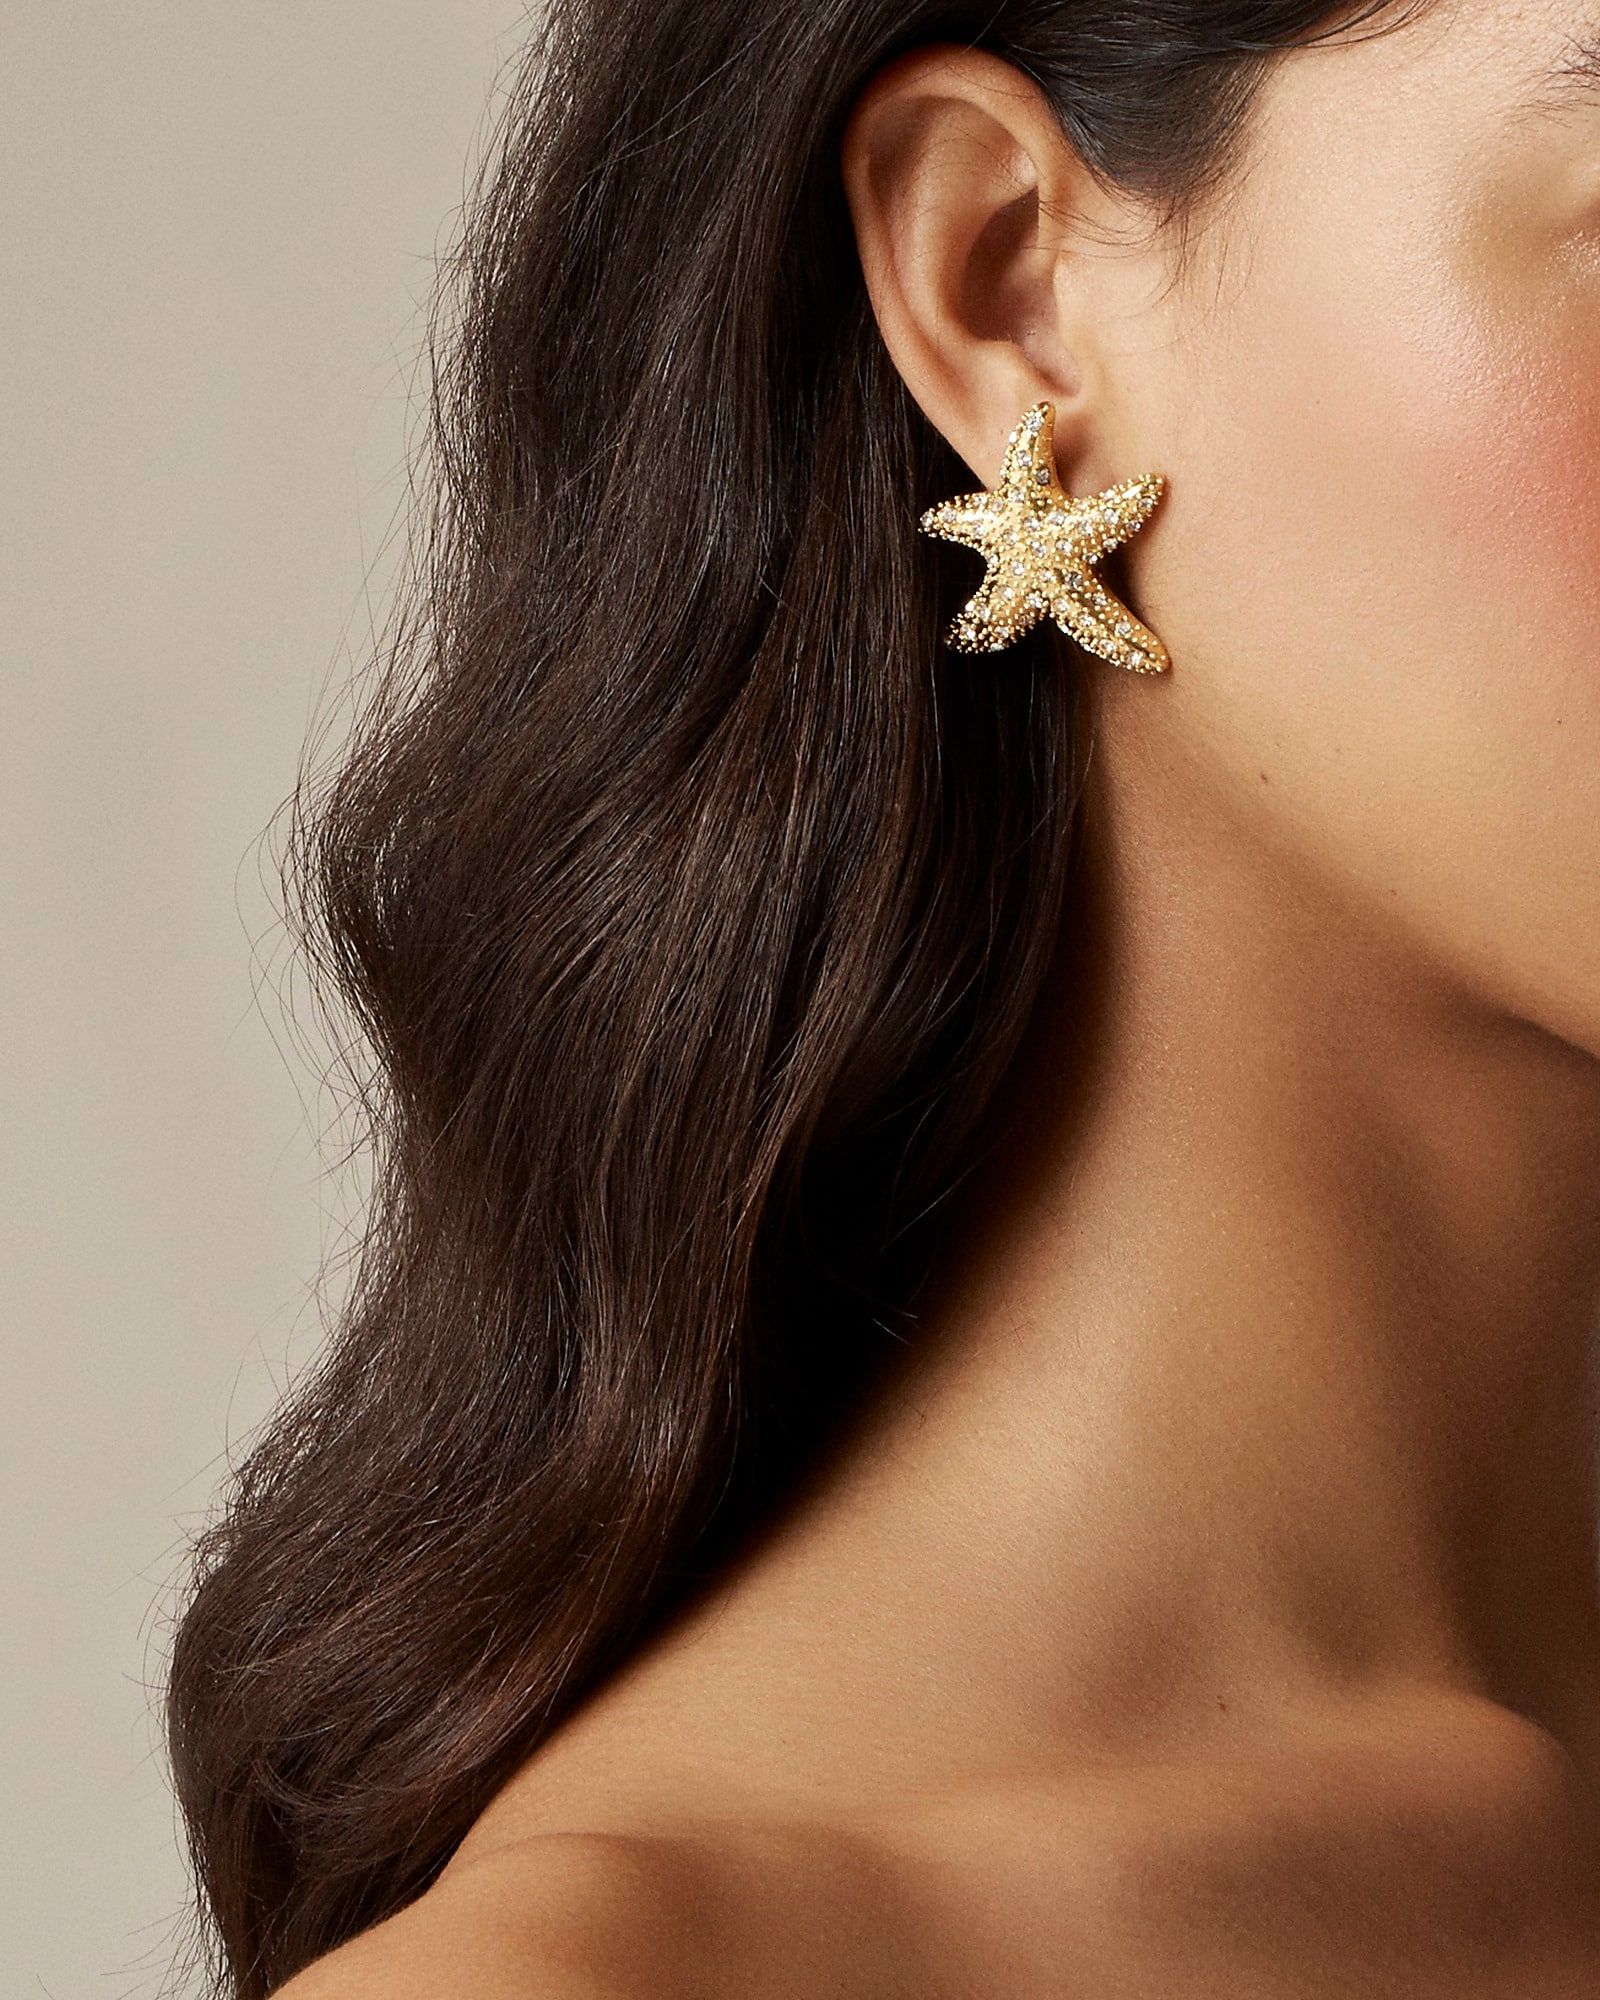 Starfish stud earrings with pavé crystals | J.Crew US